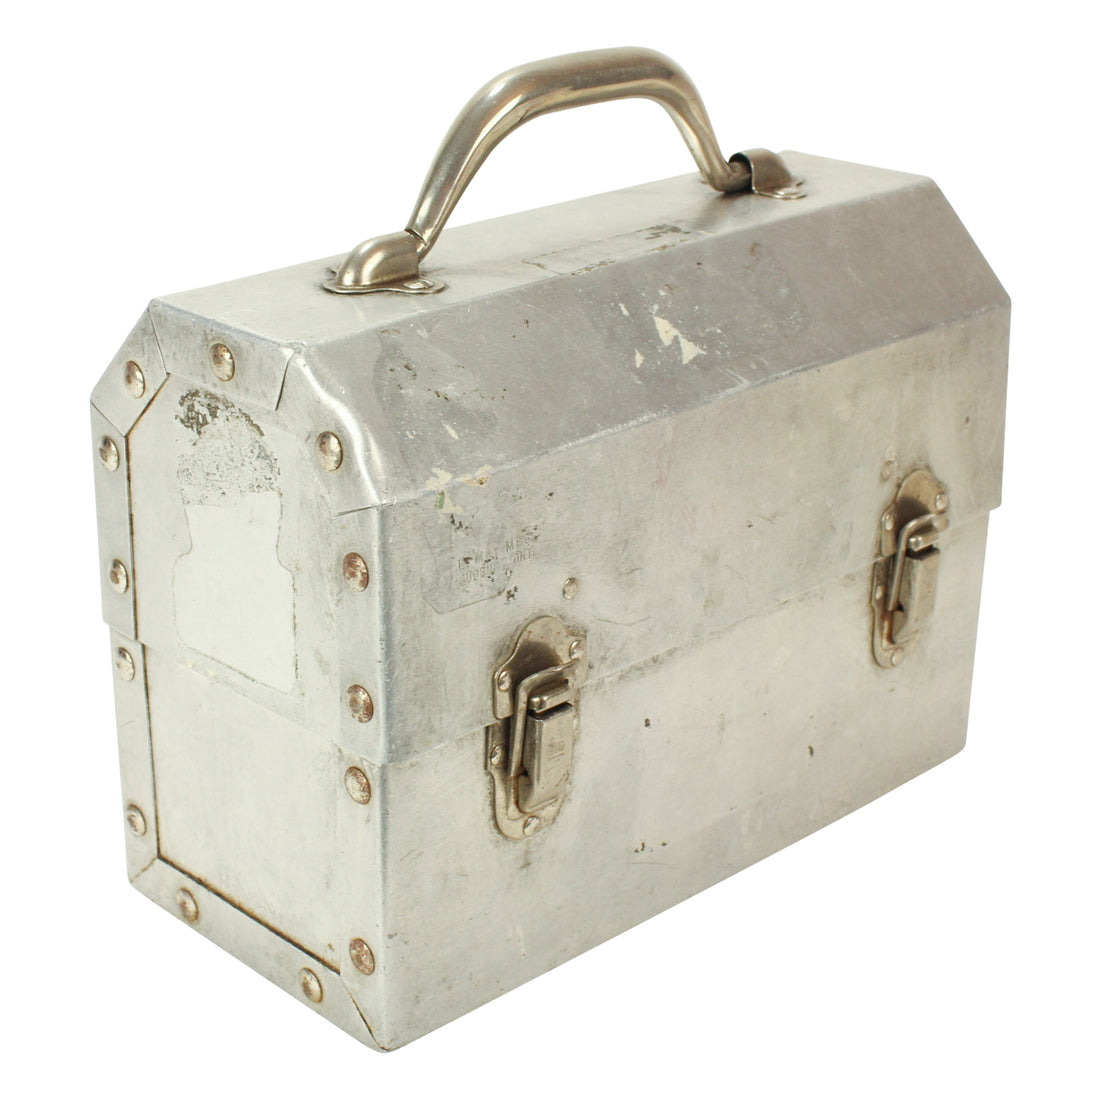 Miners Lunch Box